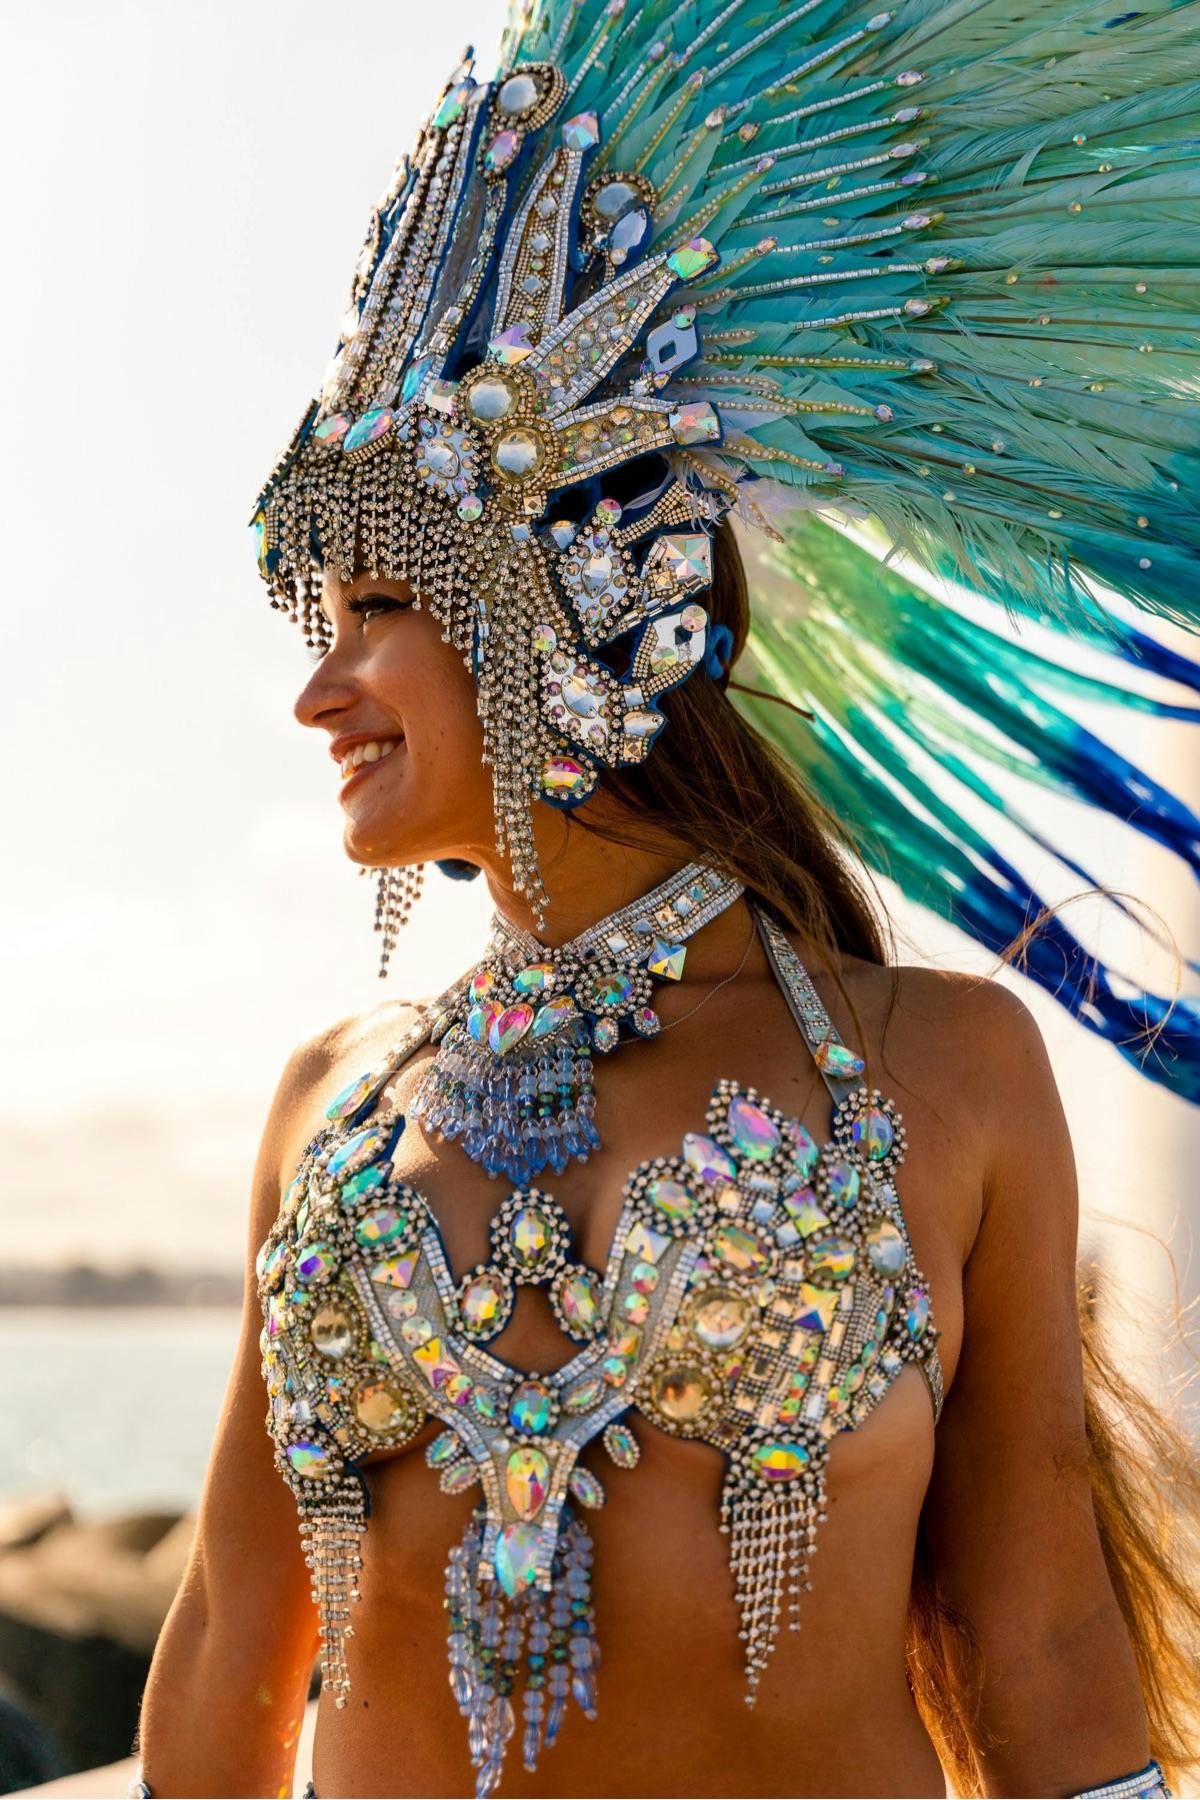 Gisella Ferreira smiles while dressed in samba attire including large feathered head dress